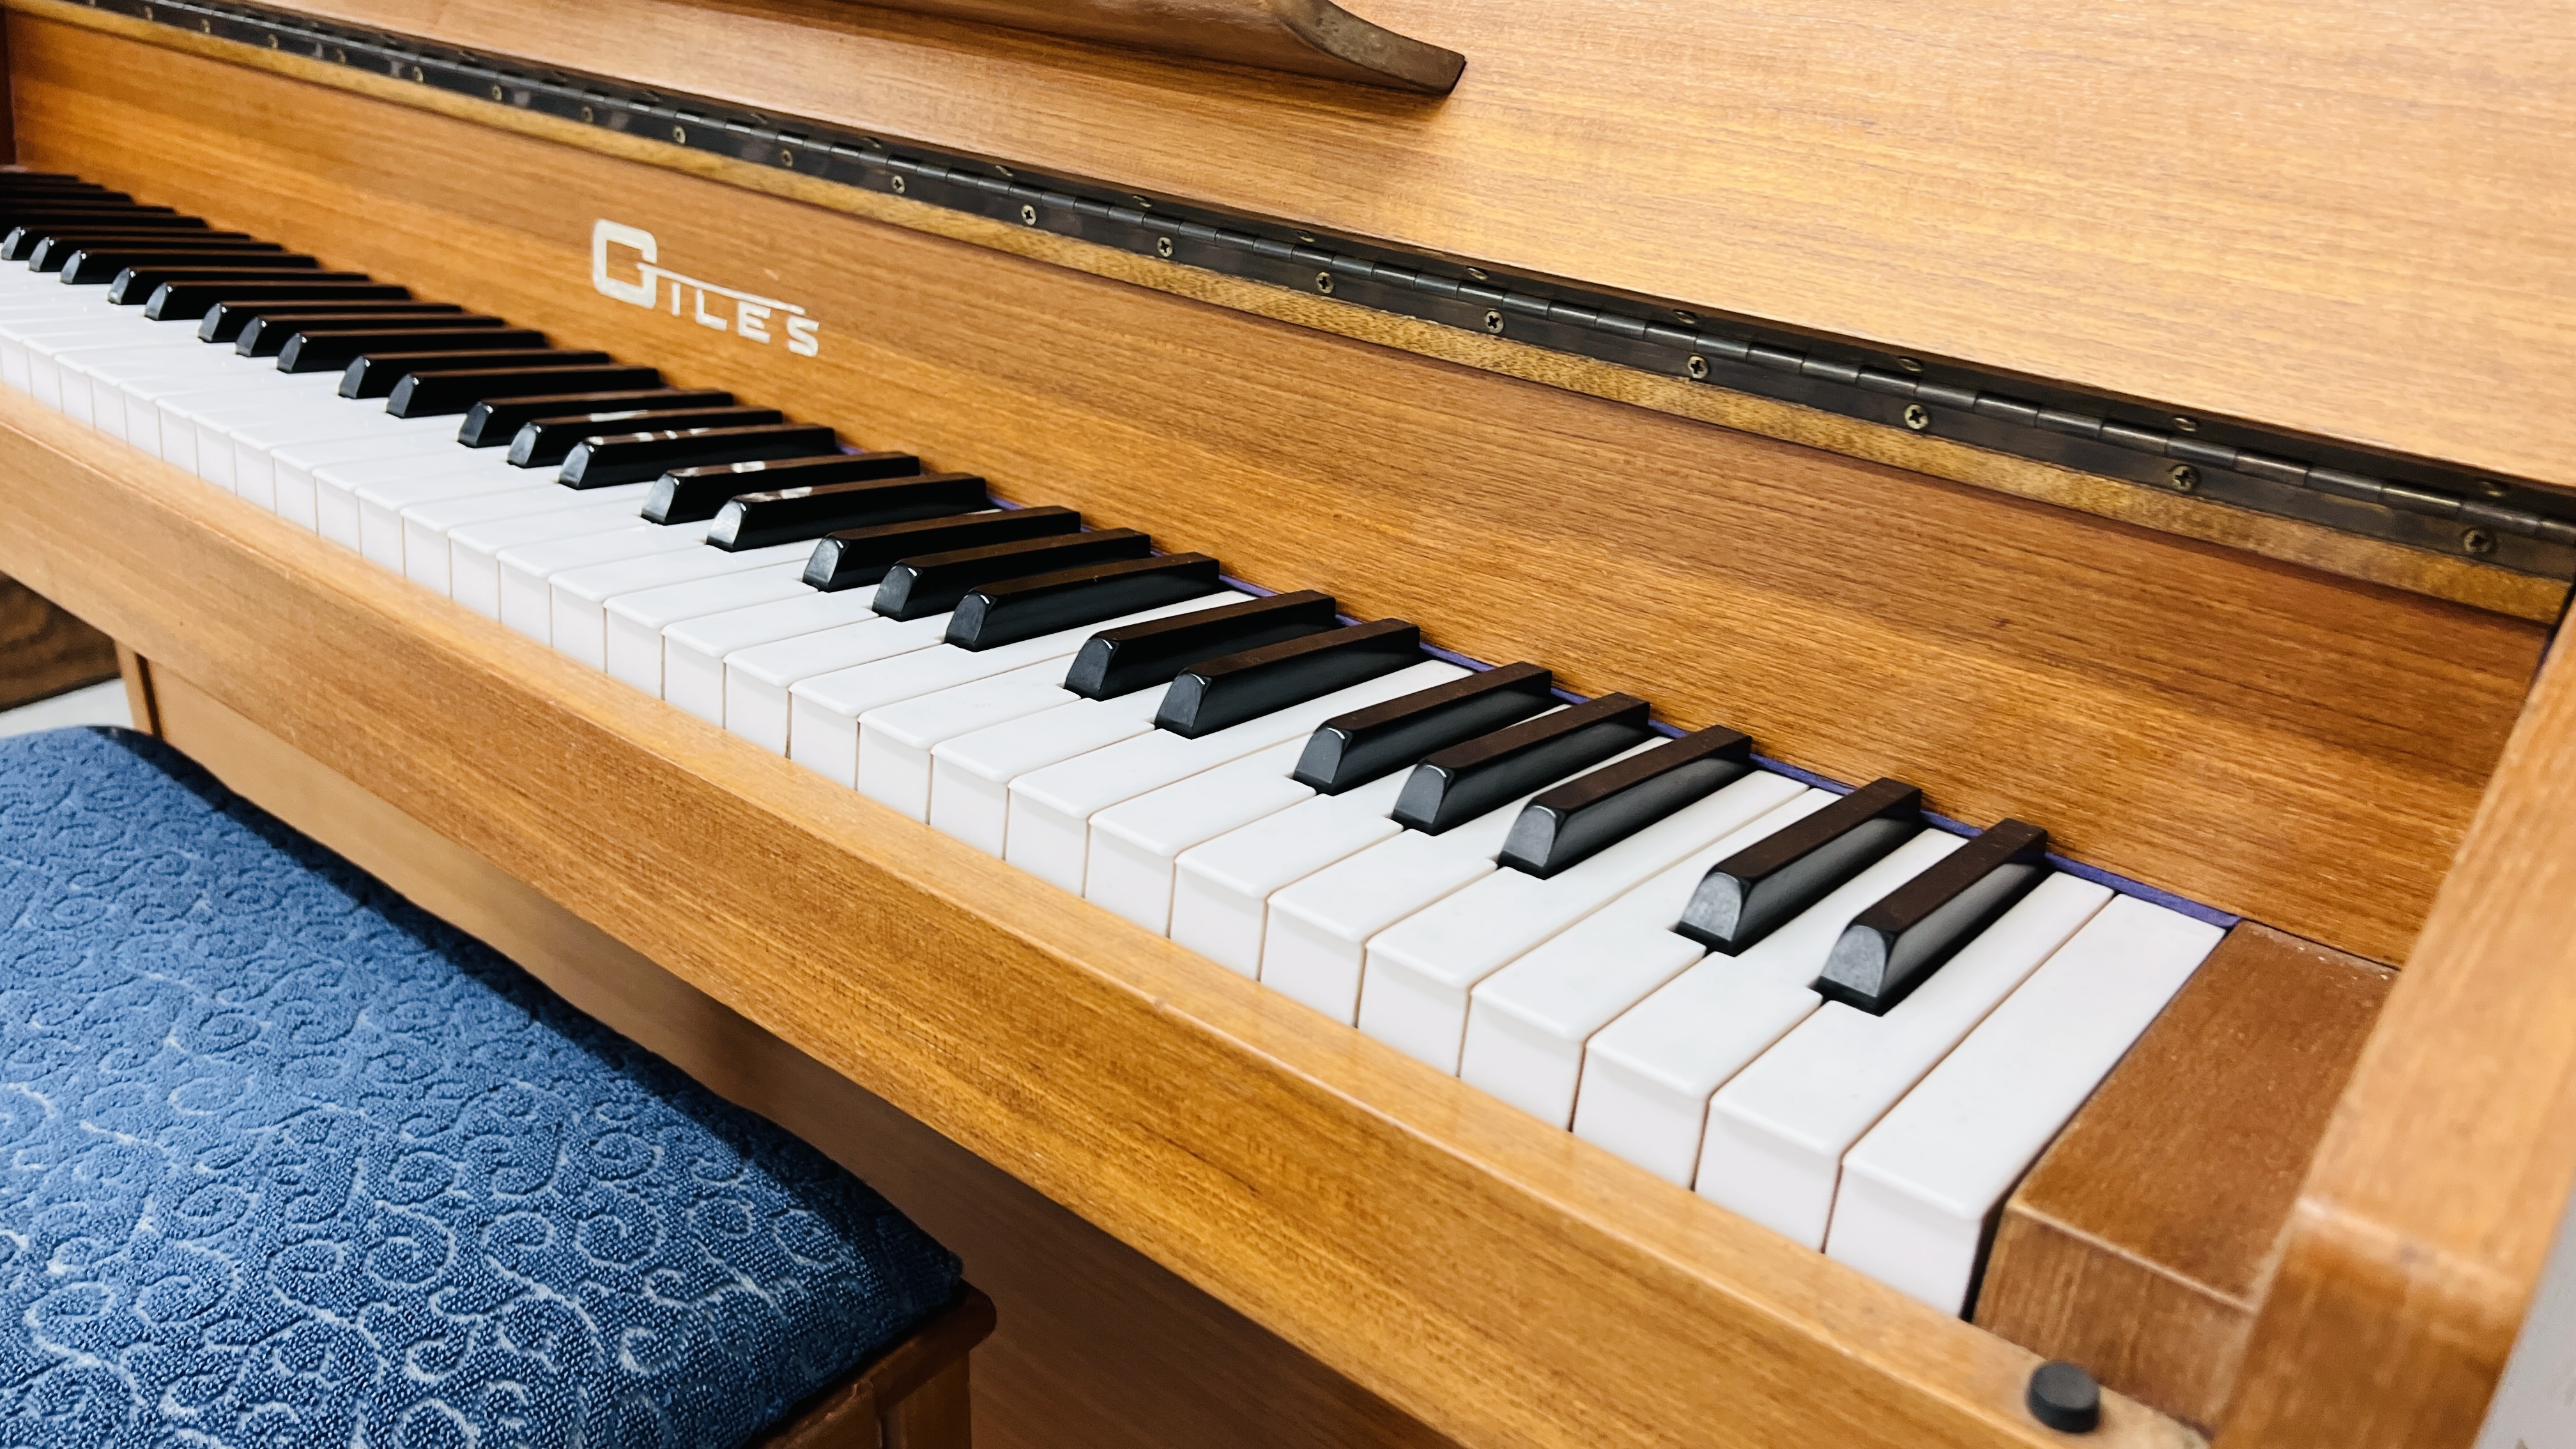 A GILES MODERN OVERSTRUNG UPRIGHT PIANO COMPLETE WITH MUSIC STOOL - Image 9 of 14